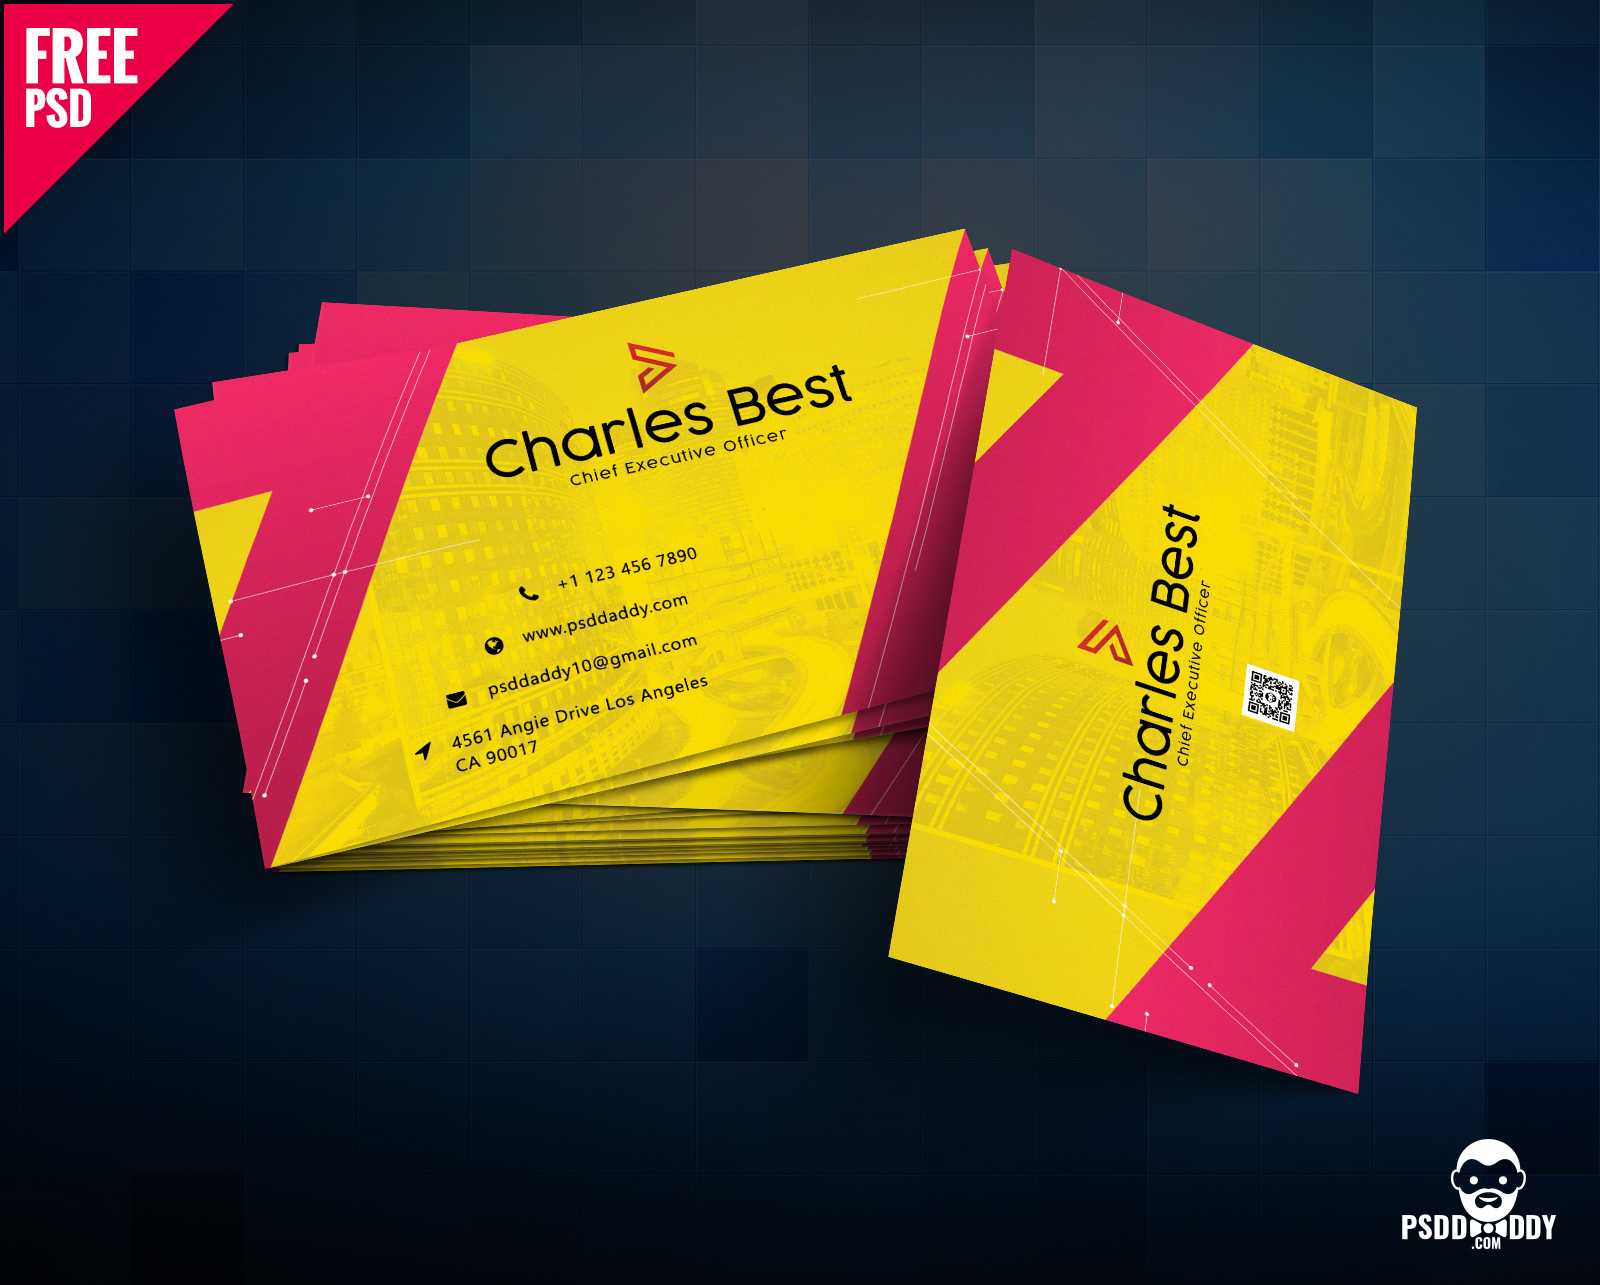 Download] Creative Business Card Free Psd | Psddaddy For Business Card Template Photoshop Cs6